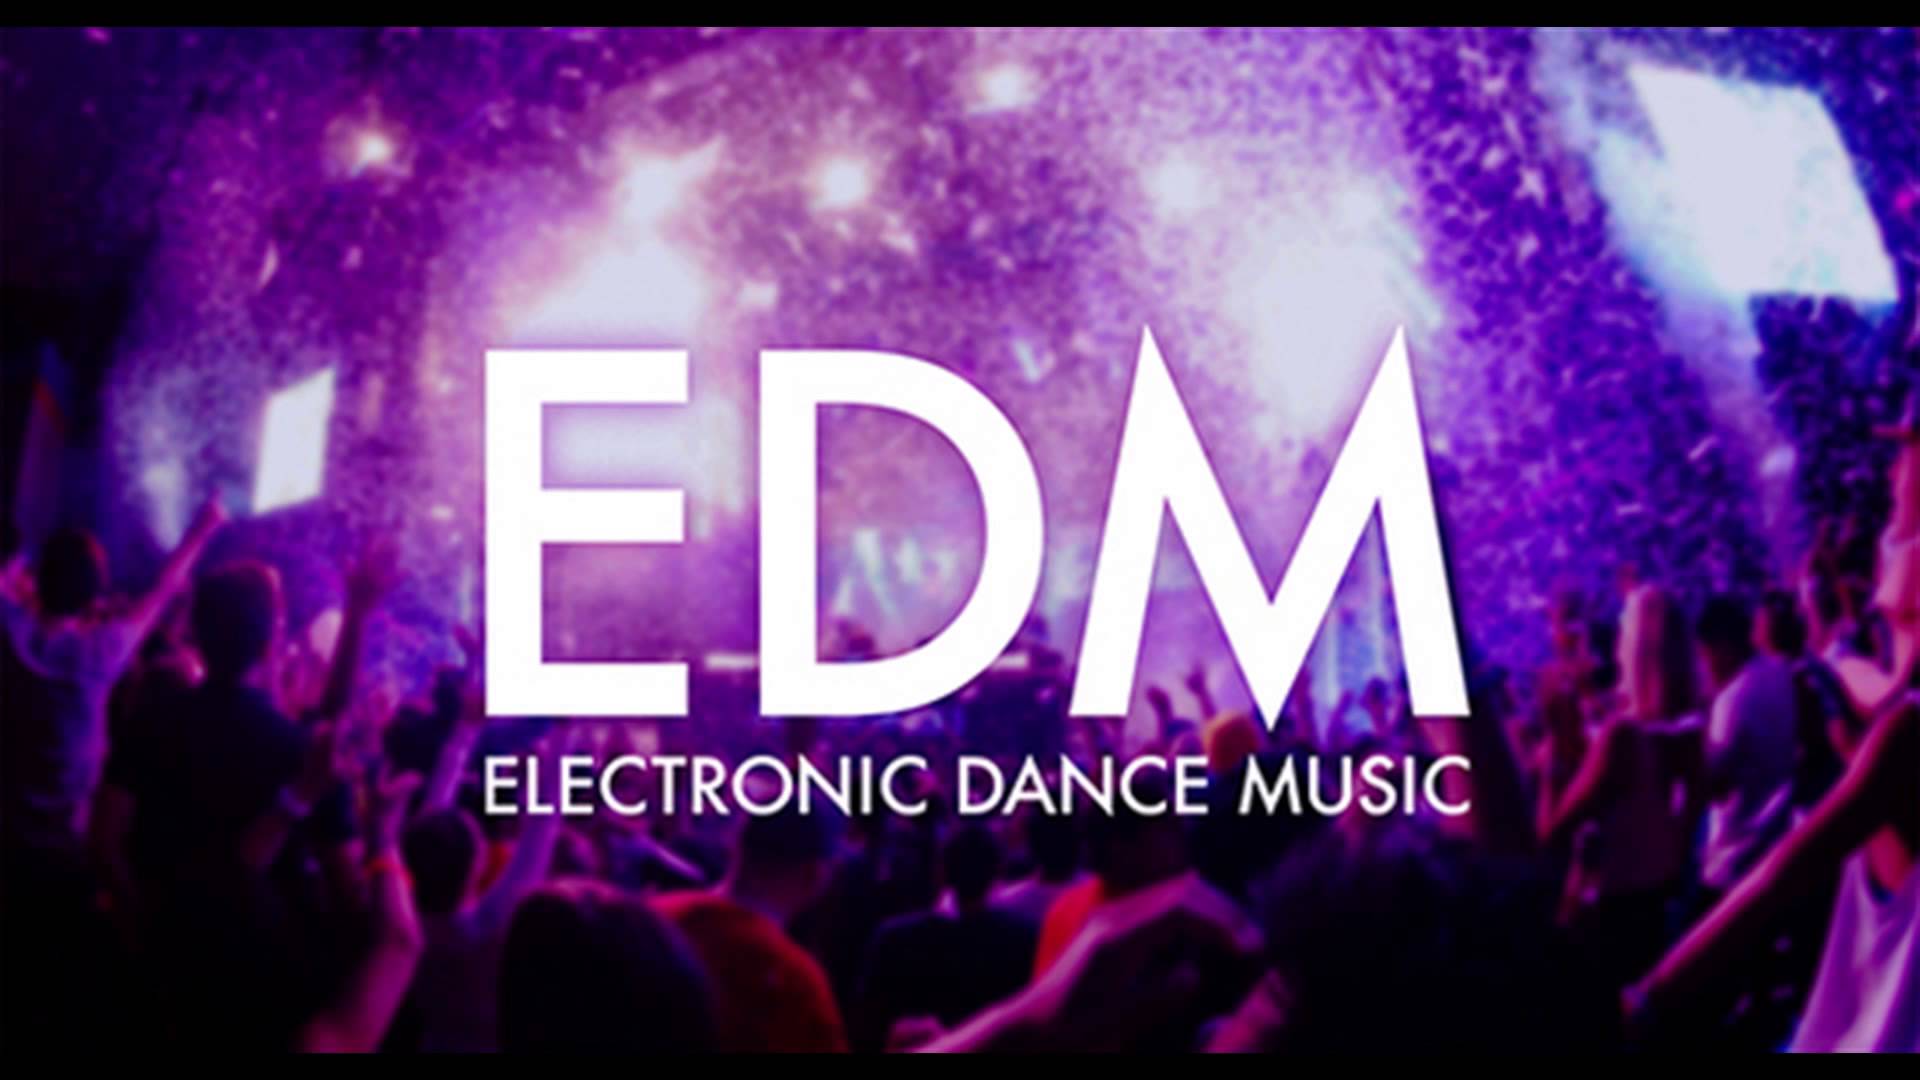 edm duo meaning